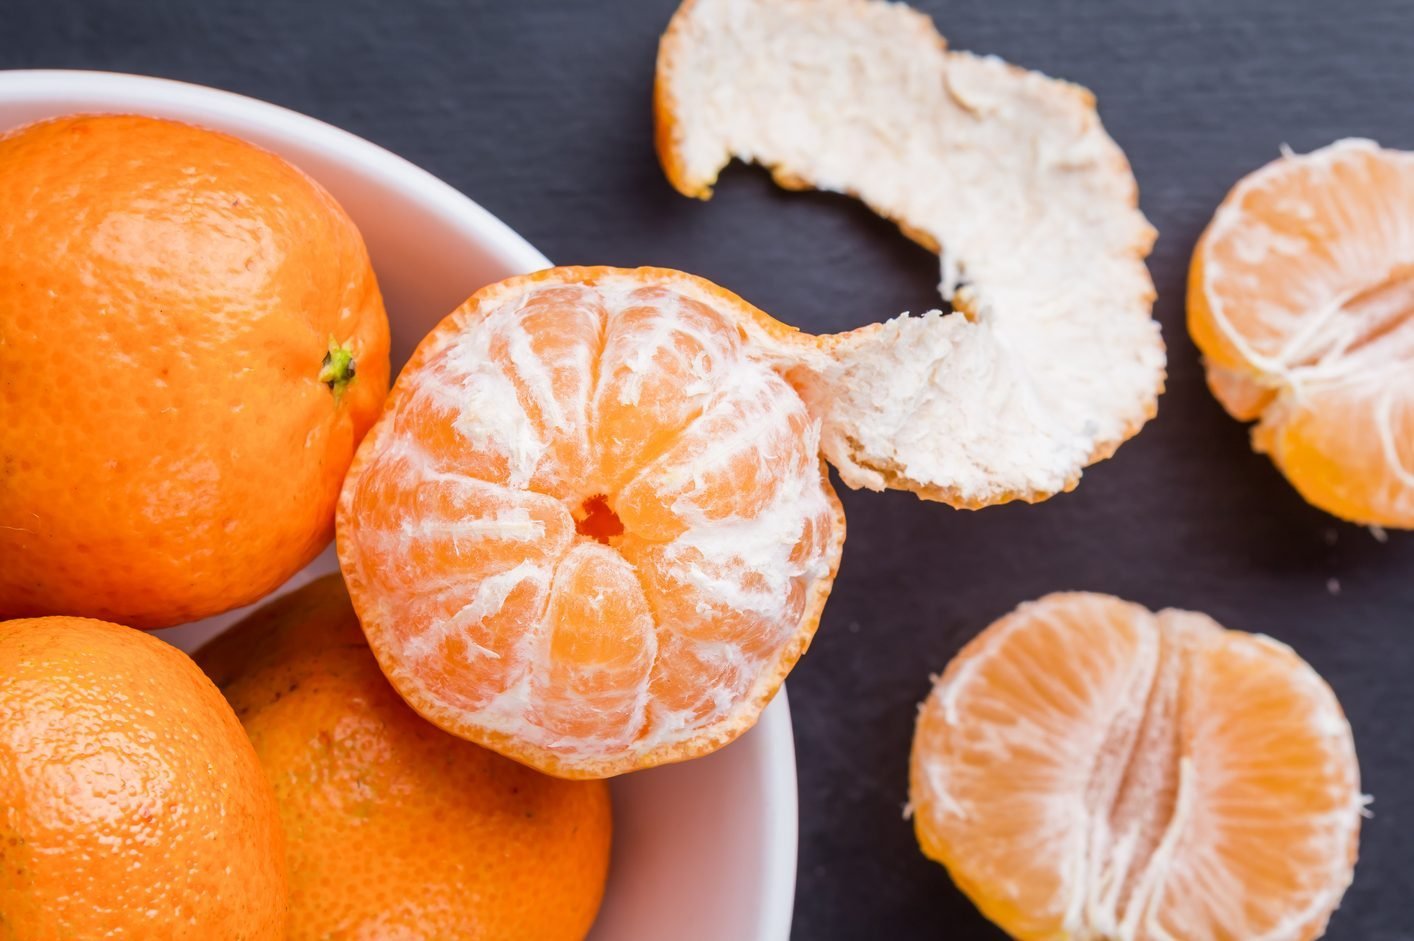 If You See White Stuff on Your Oranges, This Is What It Is